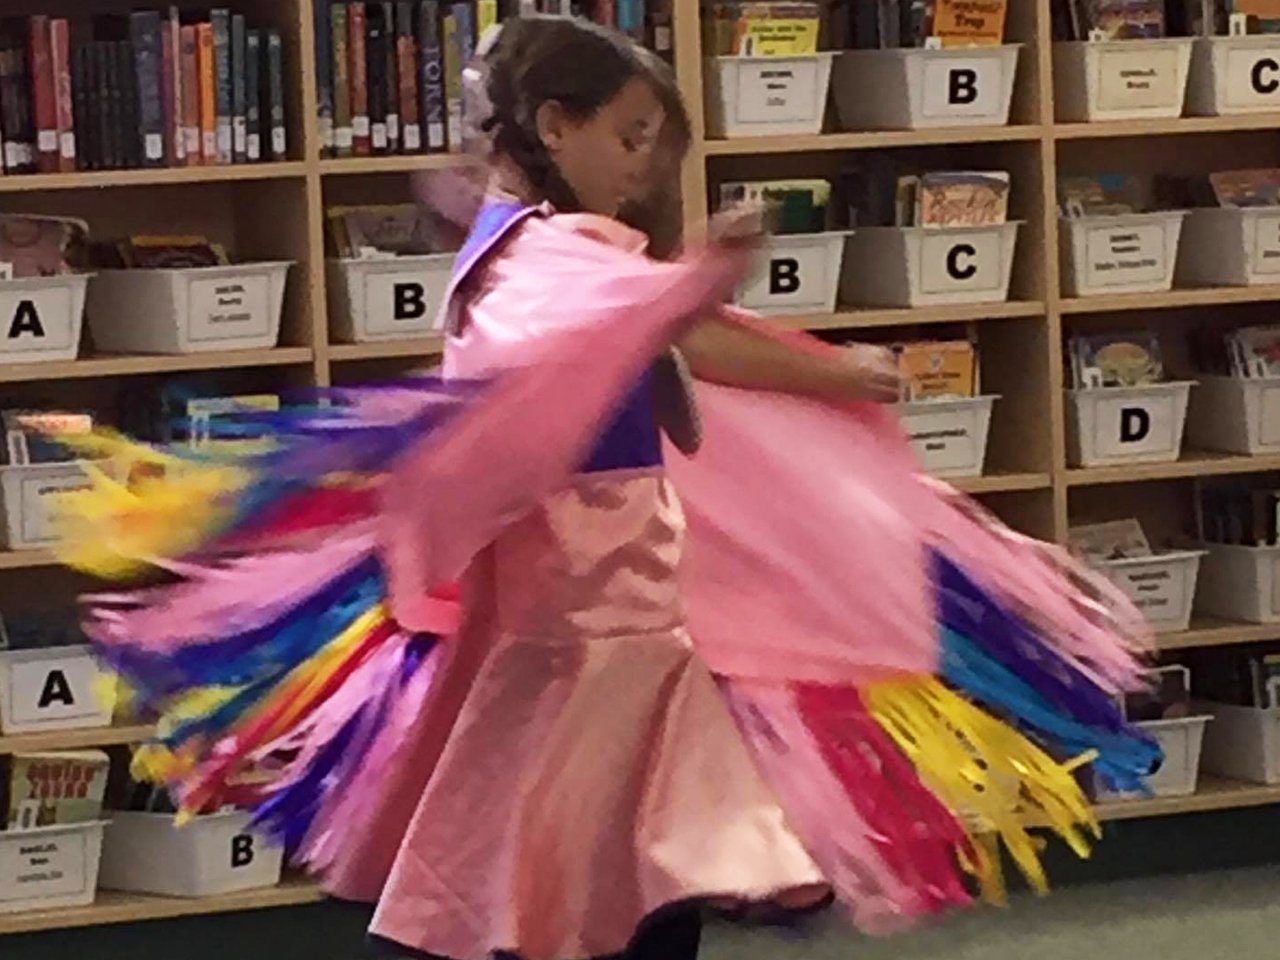 Staceys daughter spinning during a dance performance